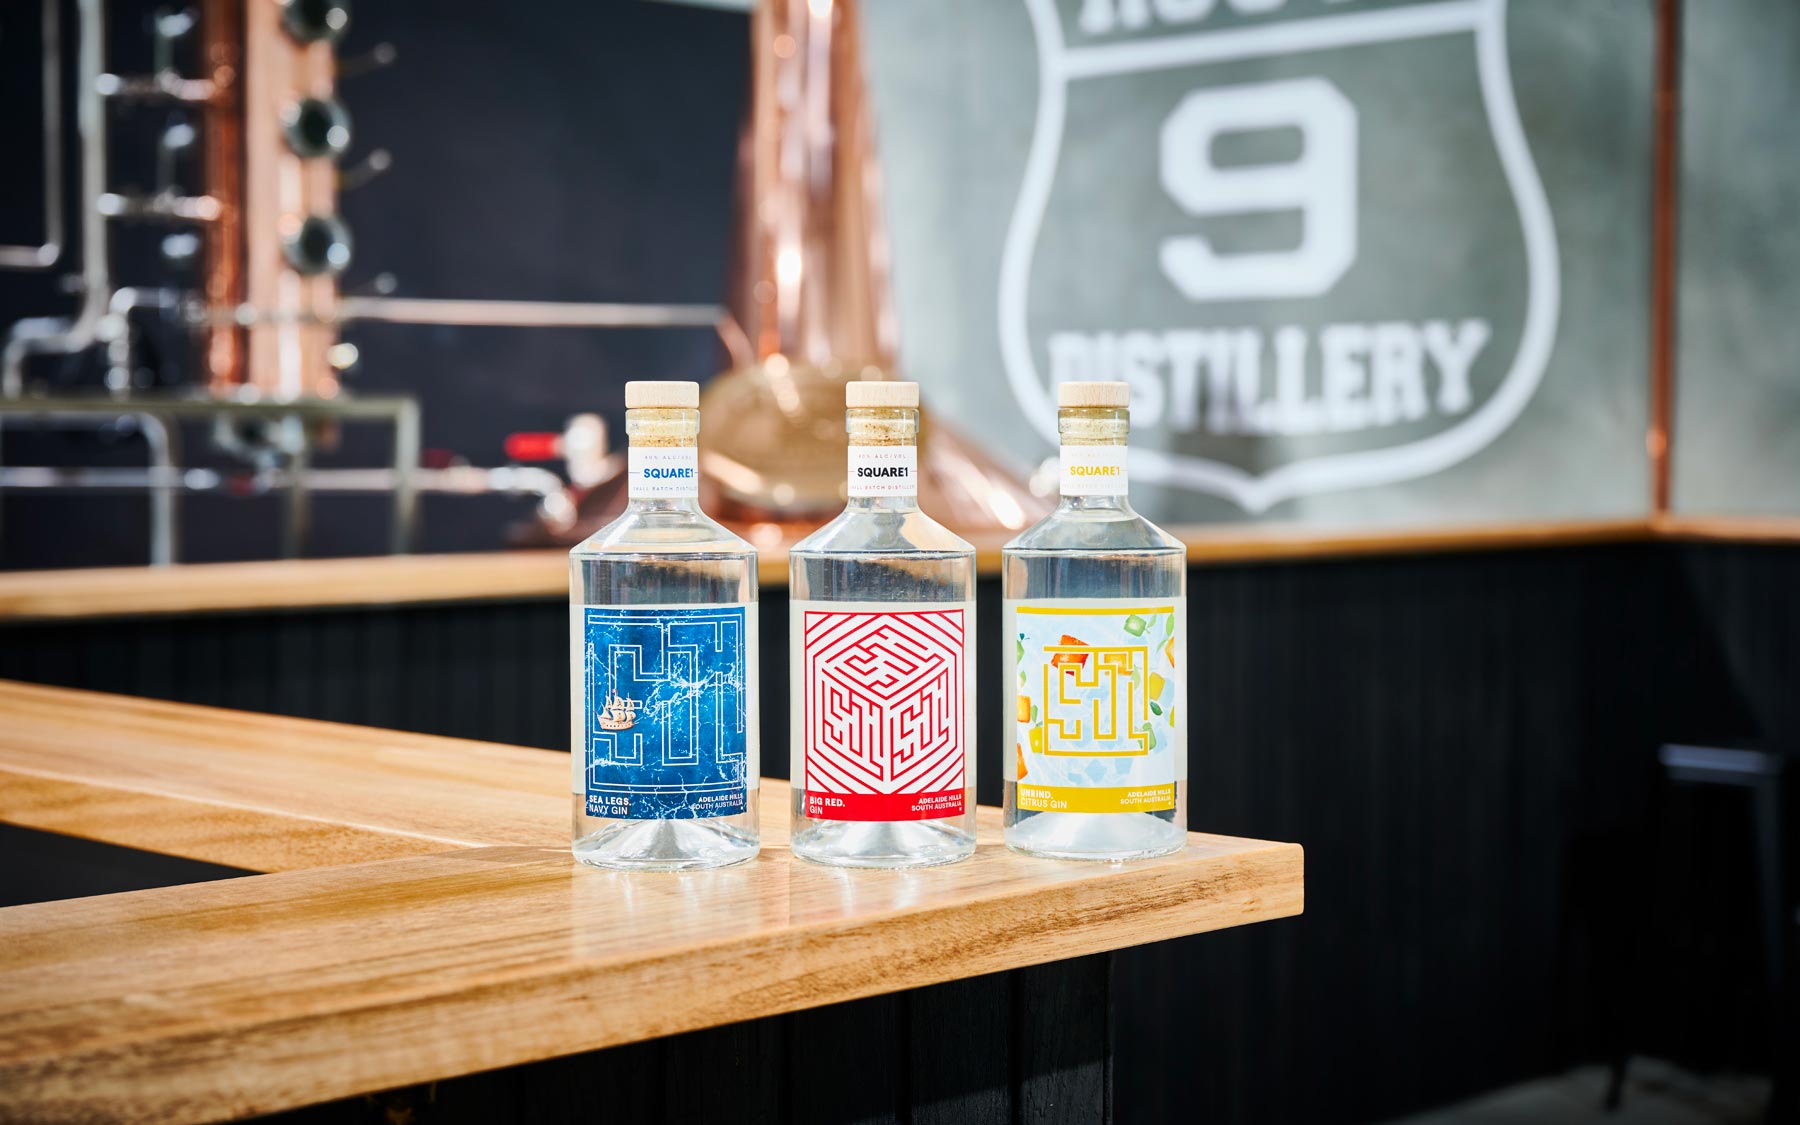 Route 9 Distillery - Square 1 Gin product range